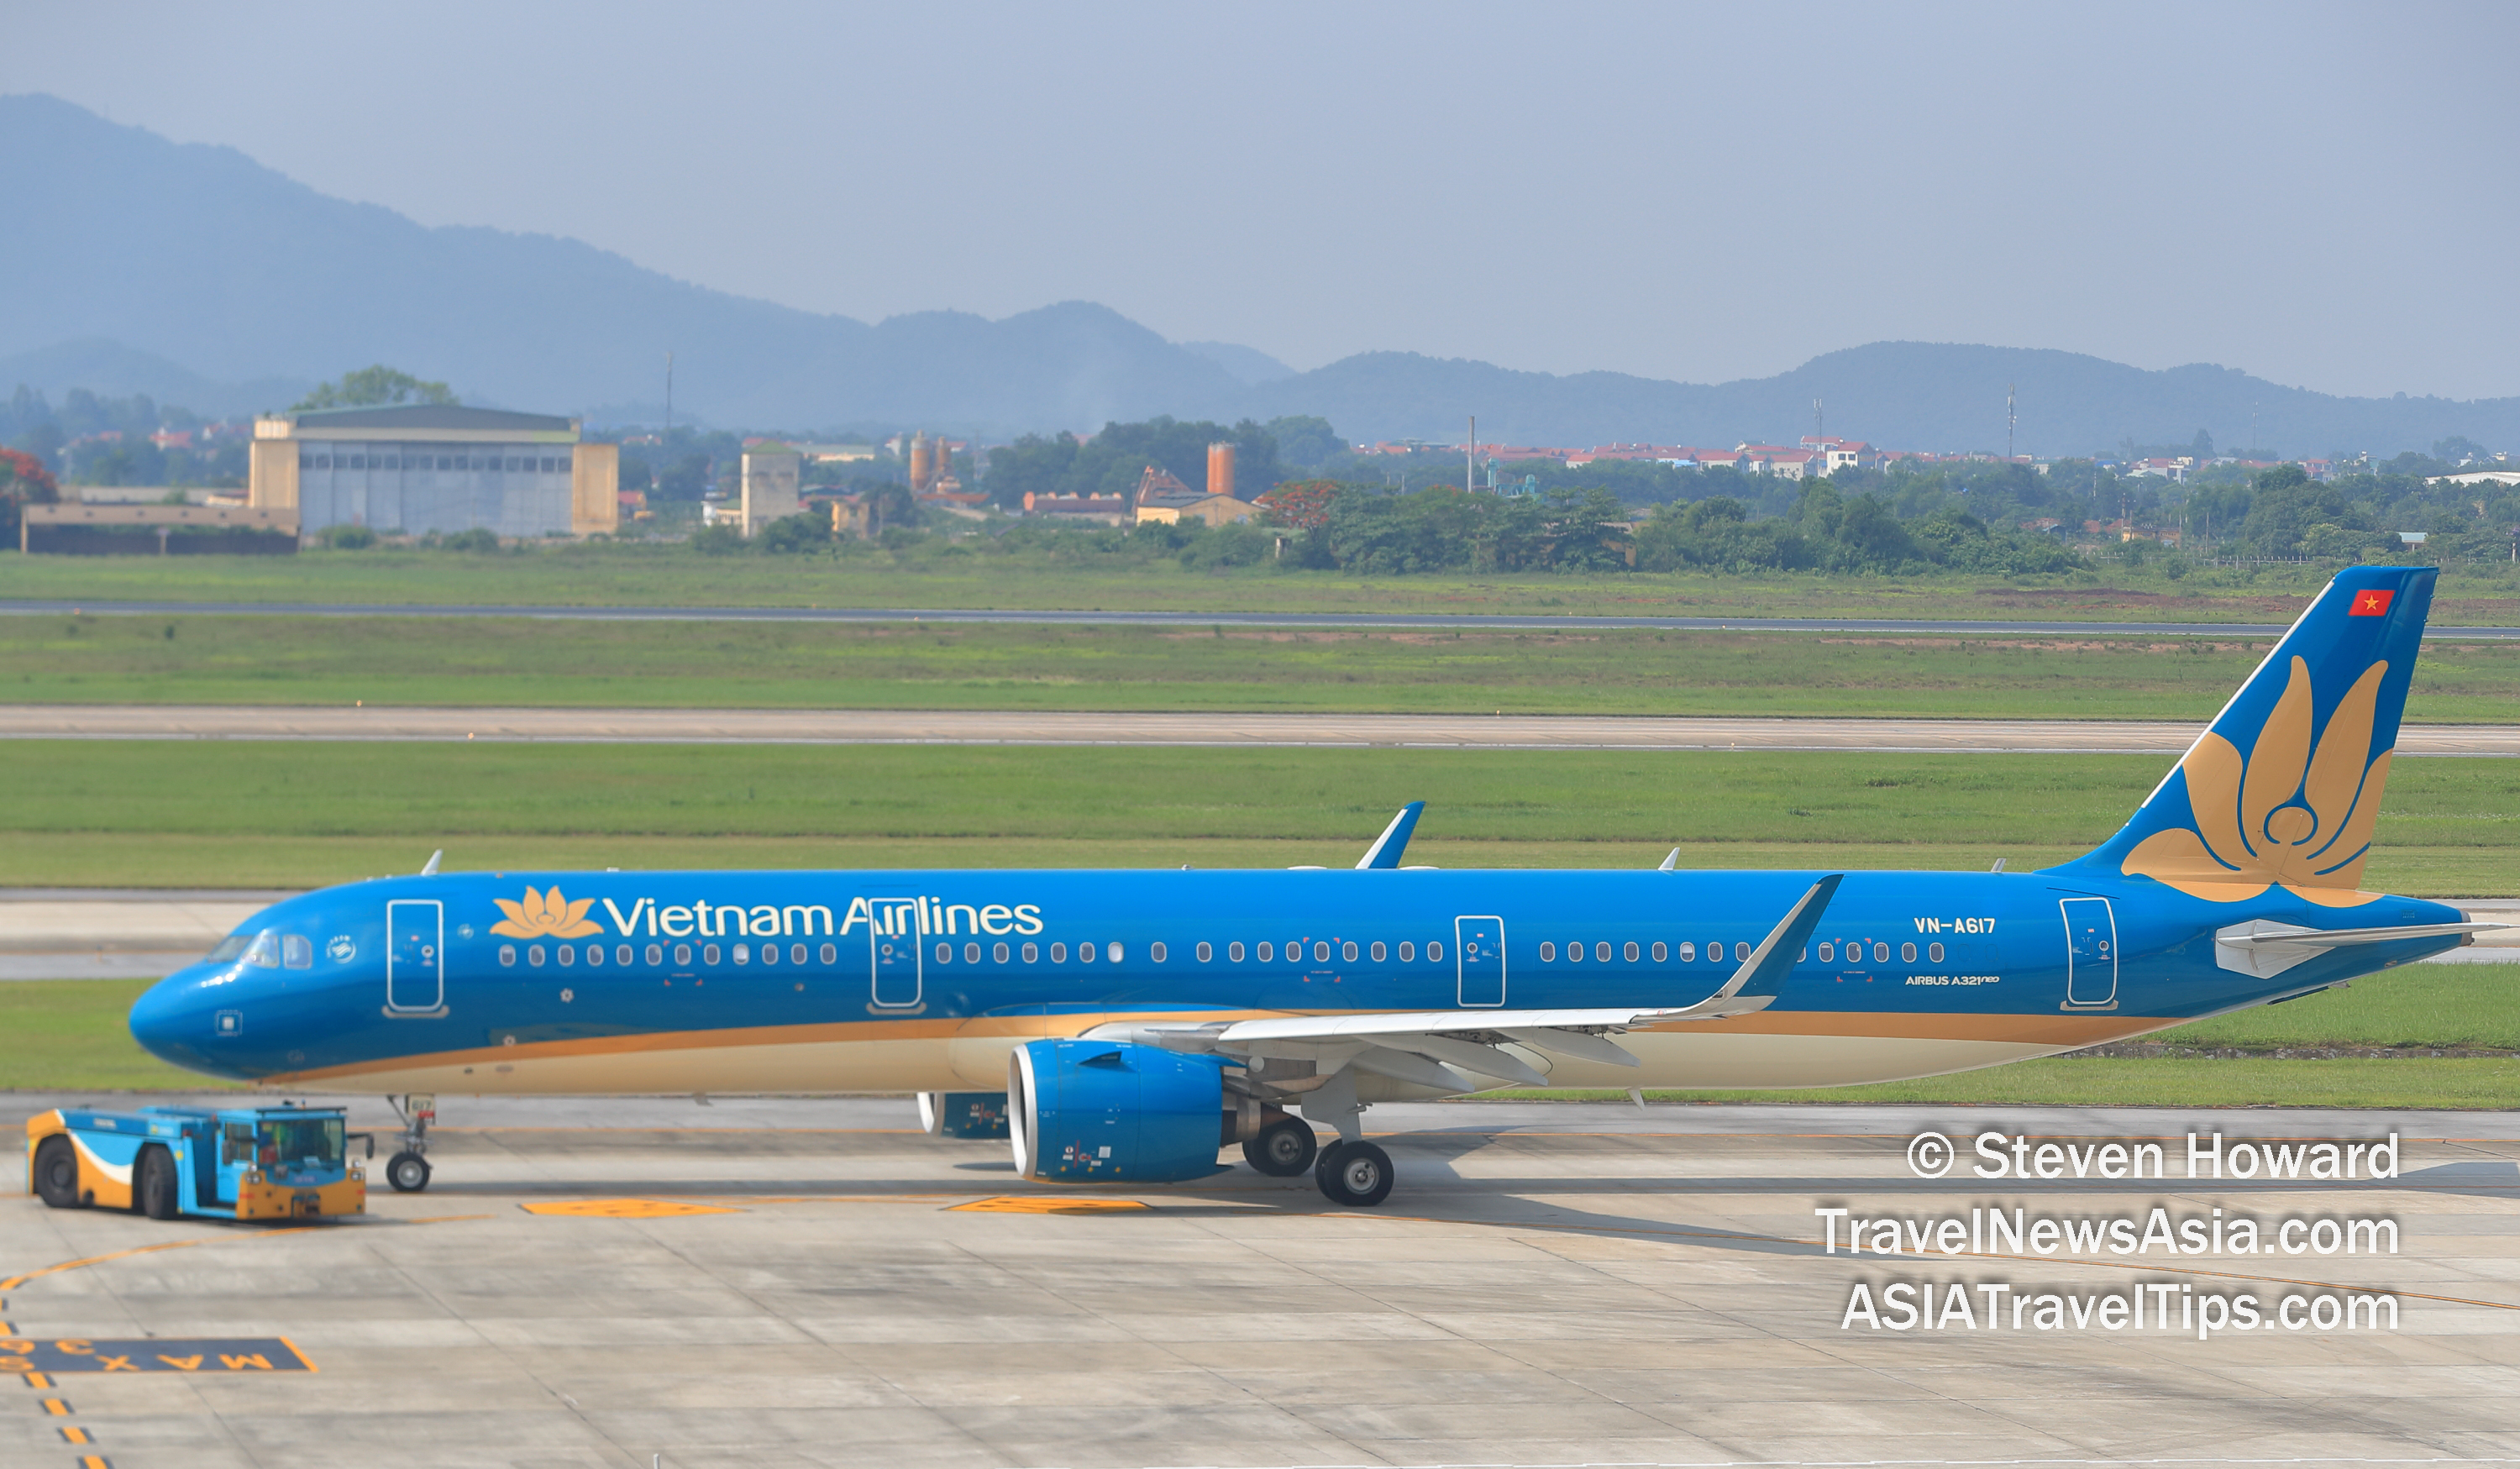 Vietnam Airlines Airbus A321neo reg: VN-A617. Picture by Steven Howard of TravelNewsAsia.com Click to enlarge.